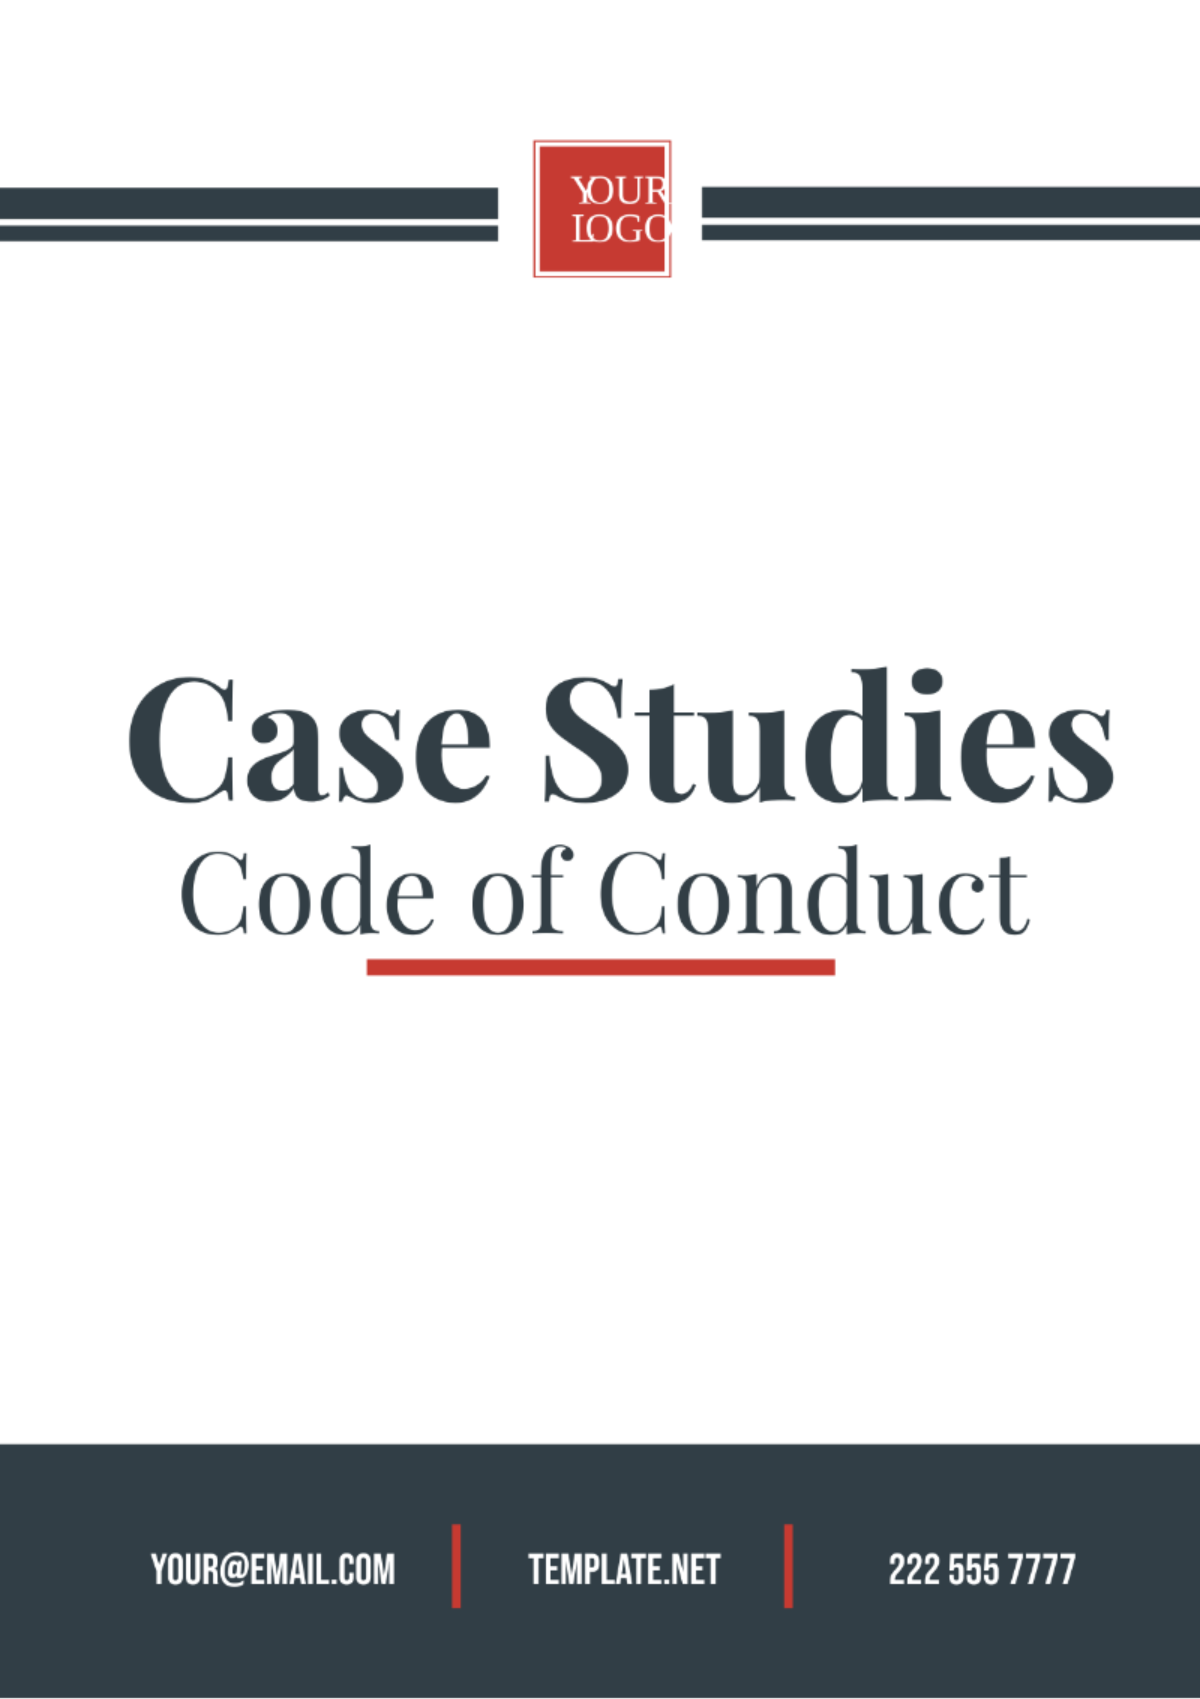 Case Studies Code of Conduct Template